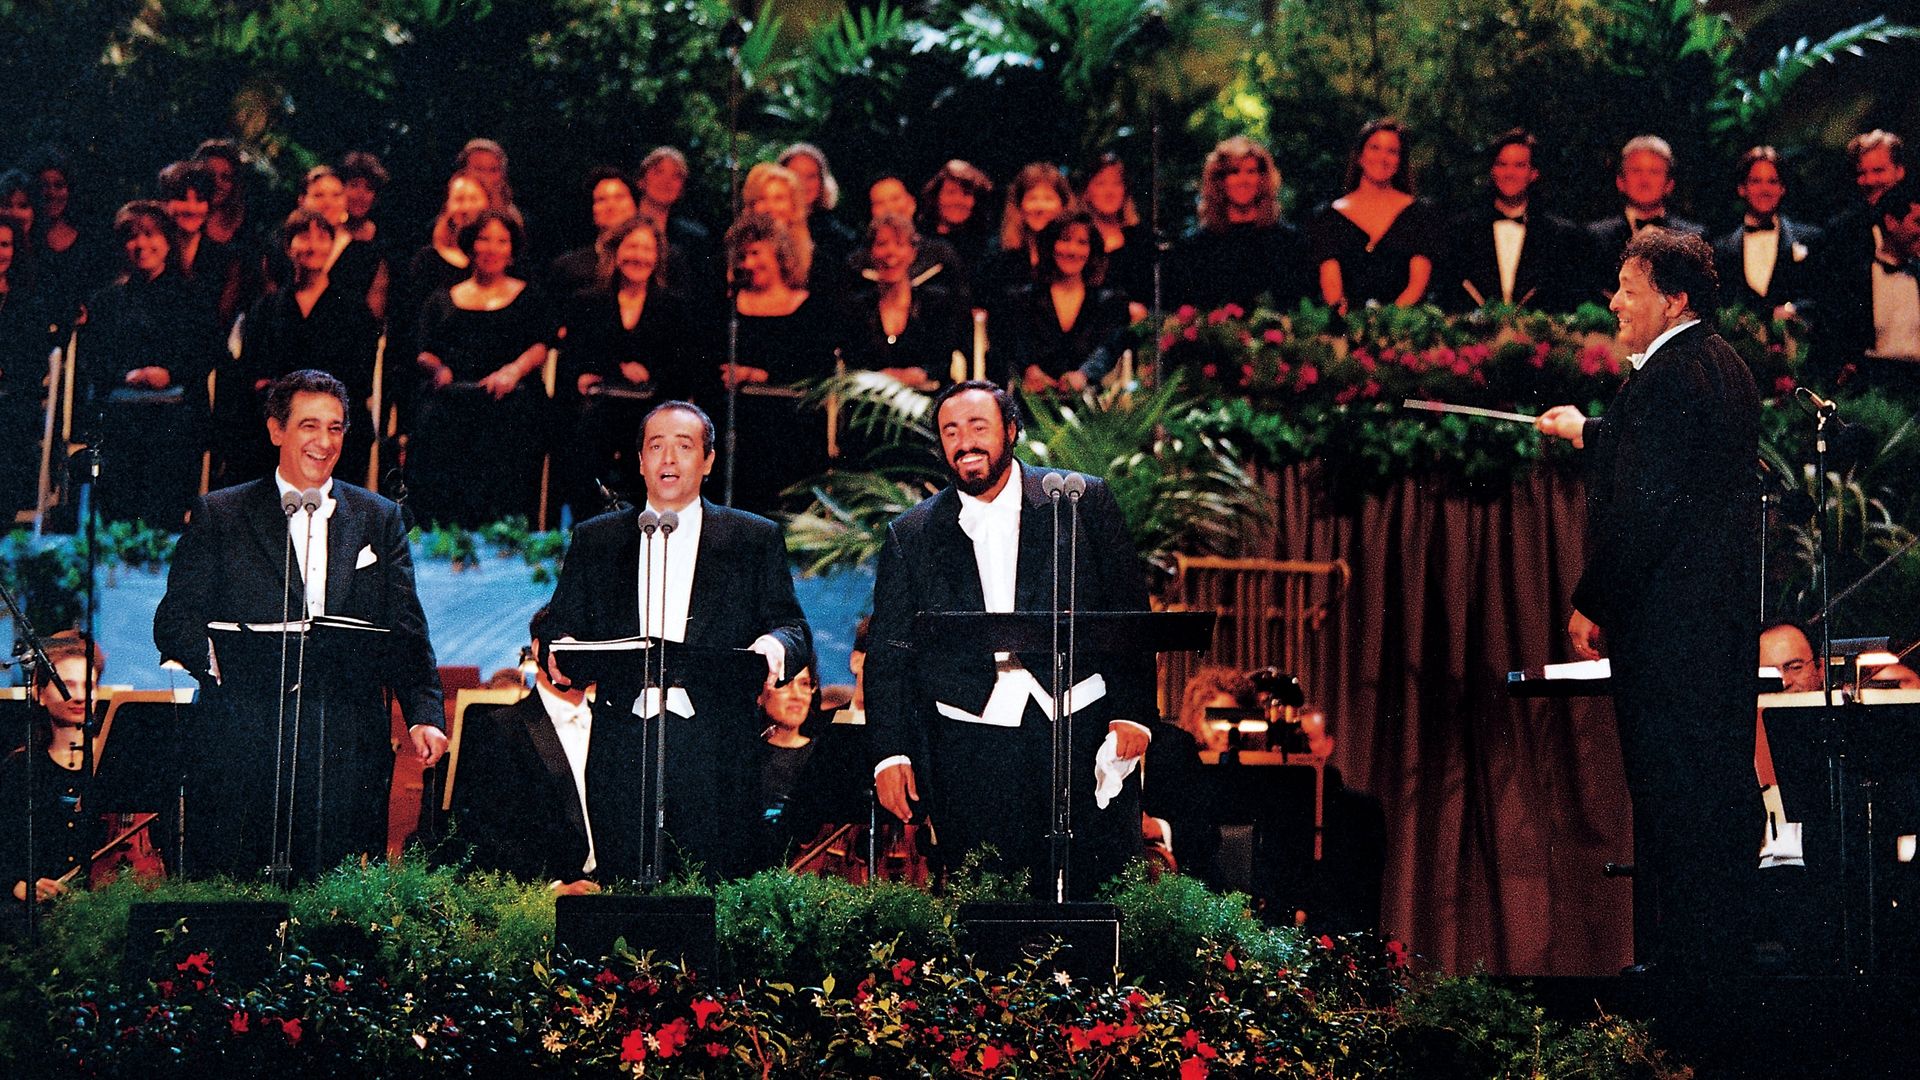 The 3 Tenors in Concert 1994 background